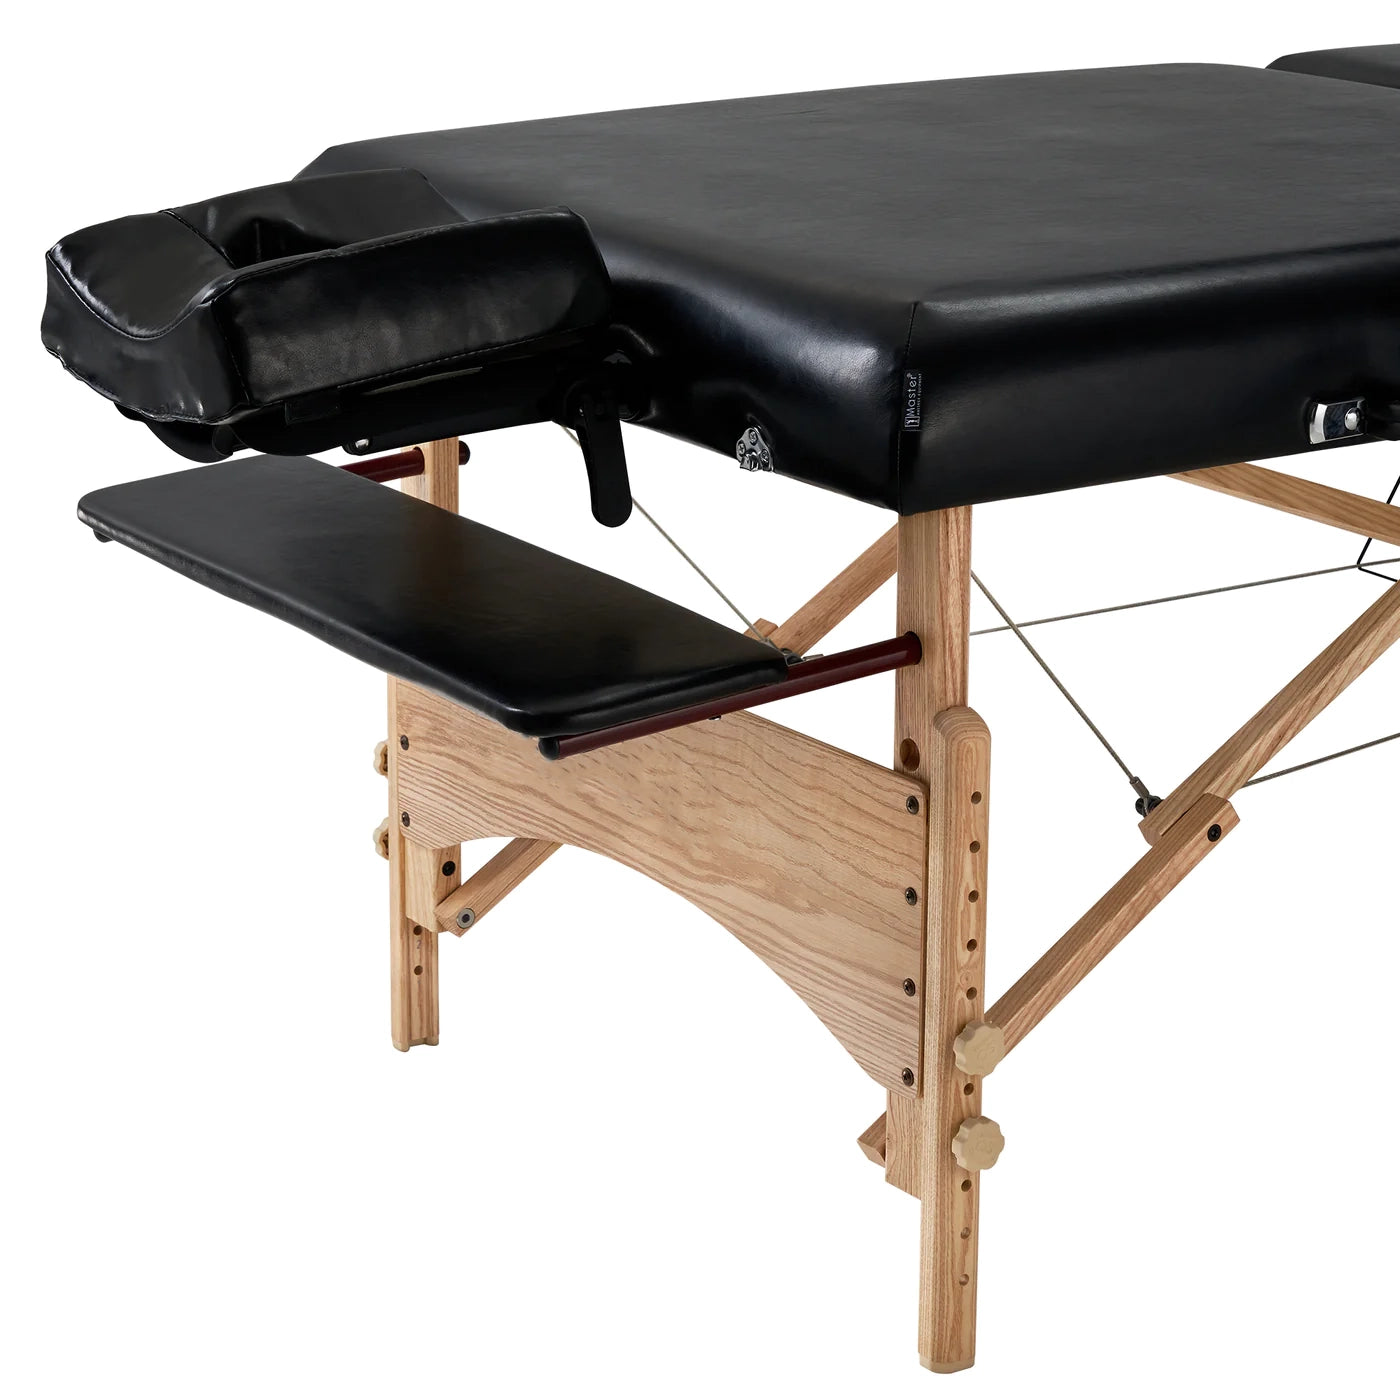 Bella2bello 32" HUSKY GIBRALTAR™ XXL Portable Massage Table Package - Built for LARGER Clients! Supports an Enormous 3,200 lbs! (Black Color)